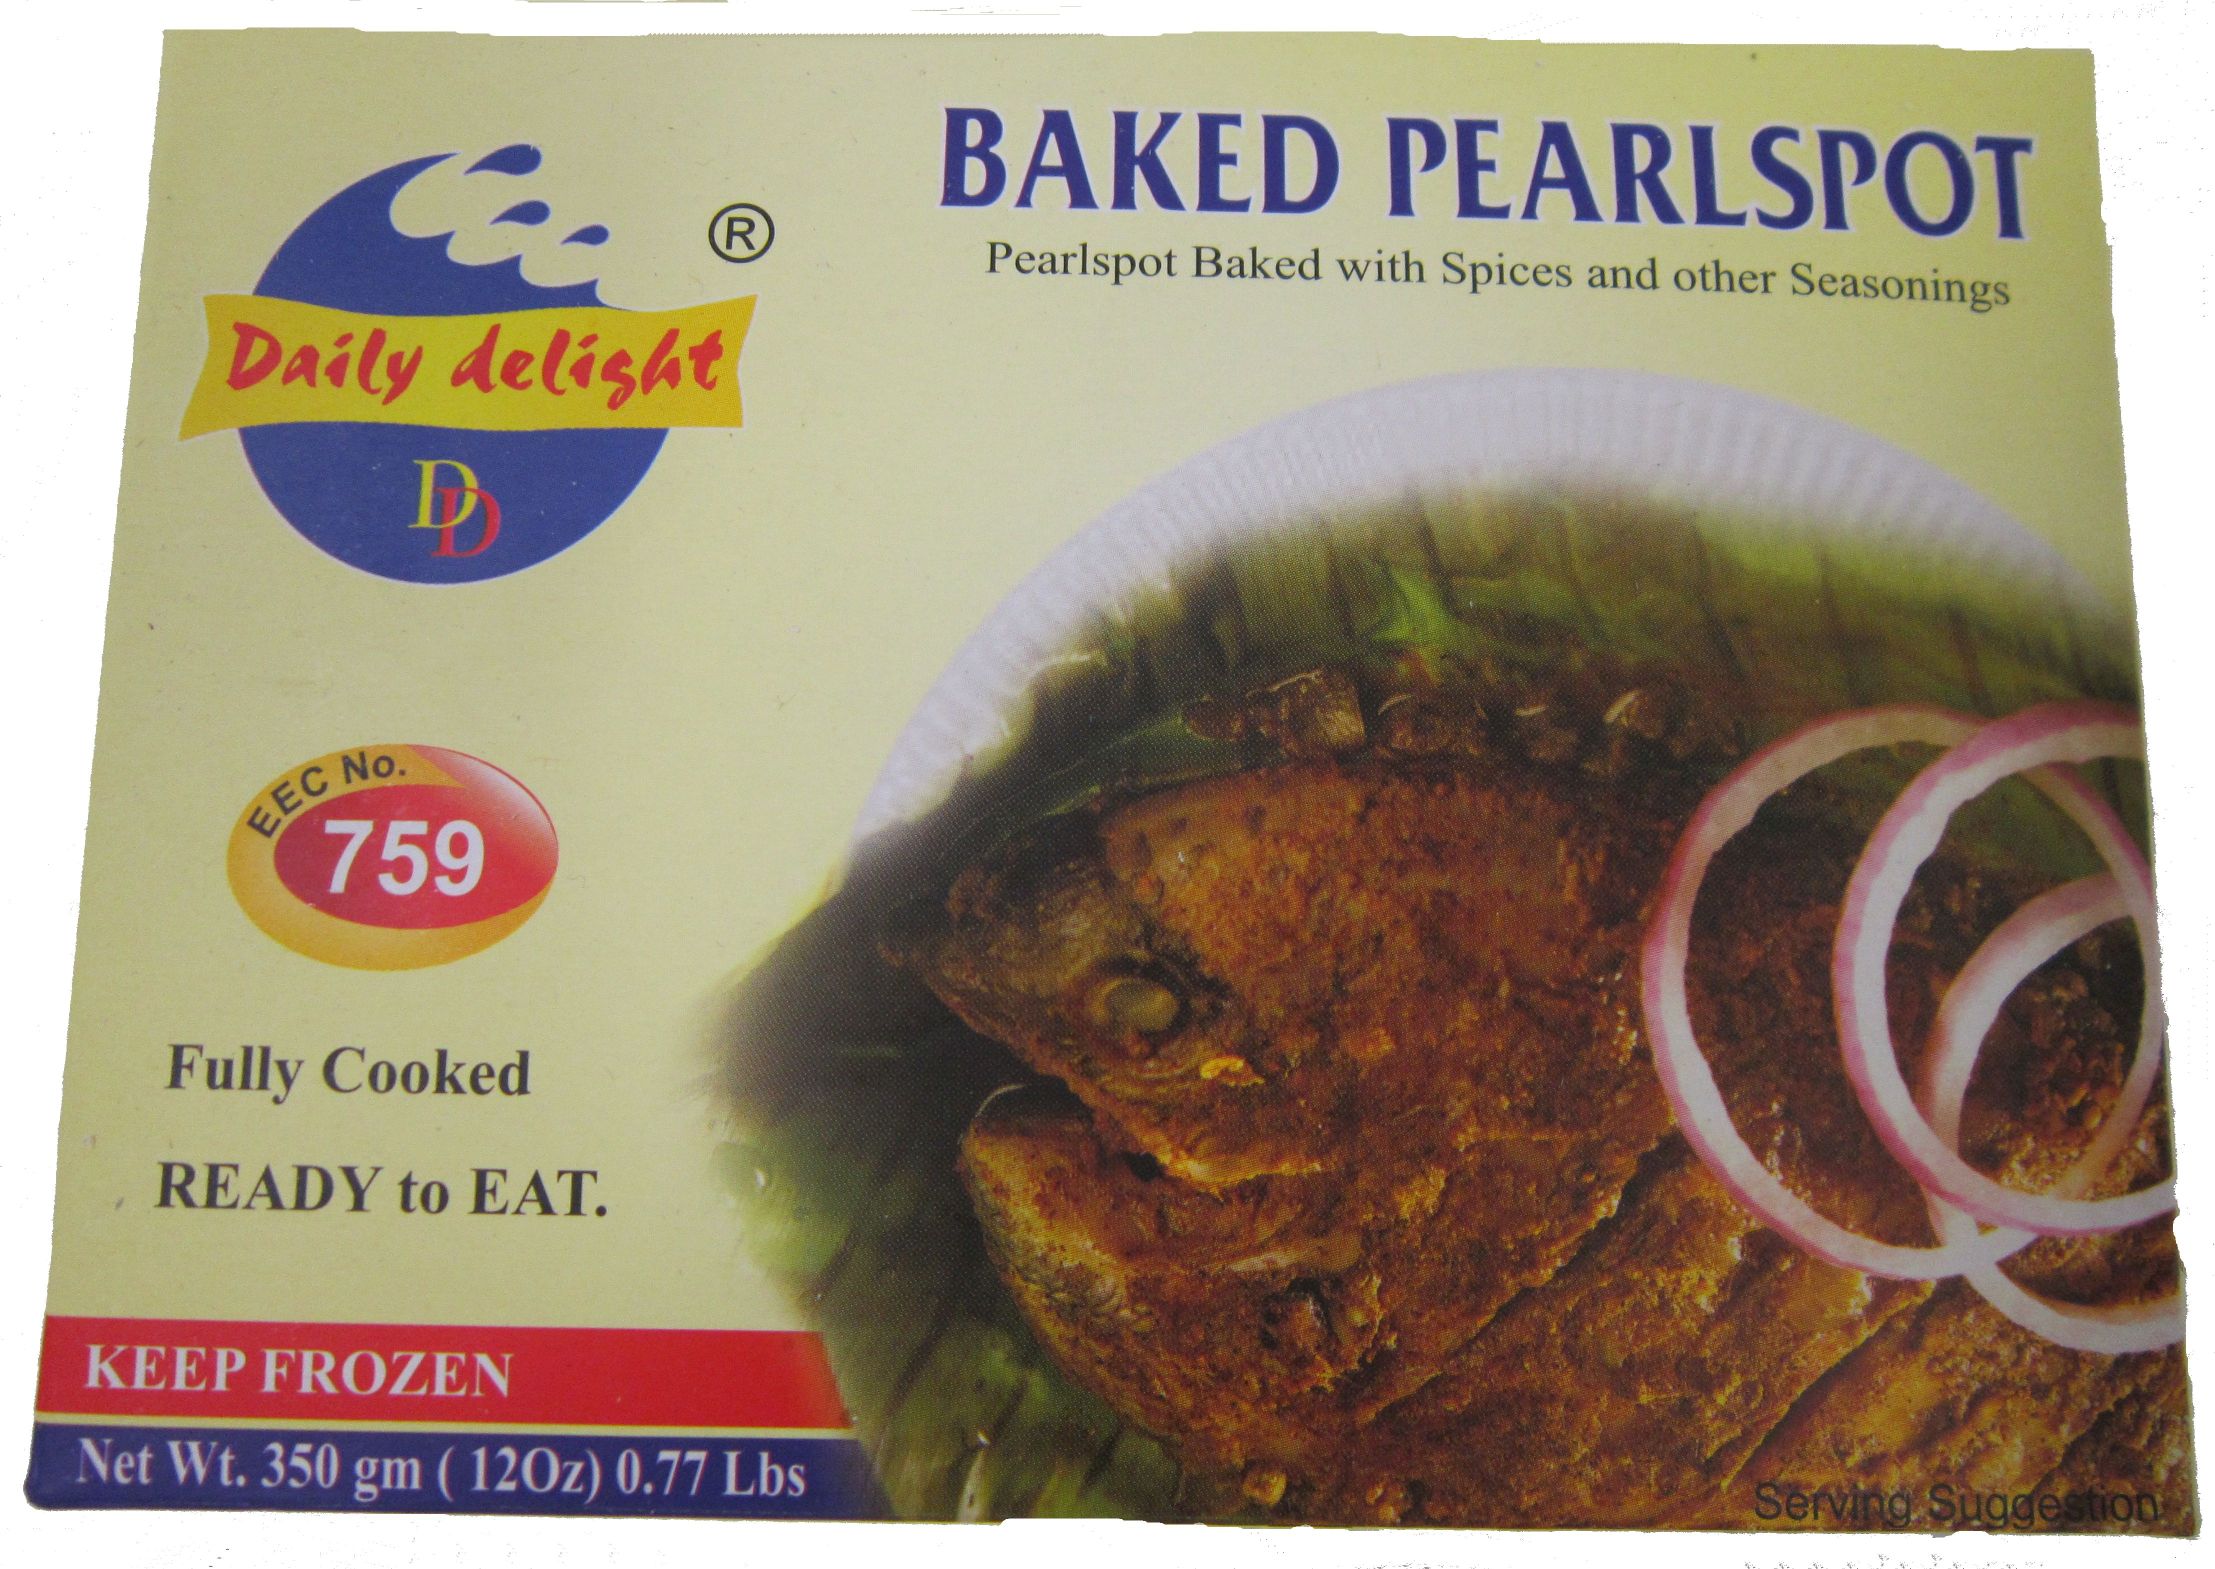 Baked Pearlspot Image